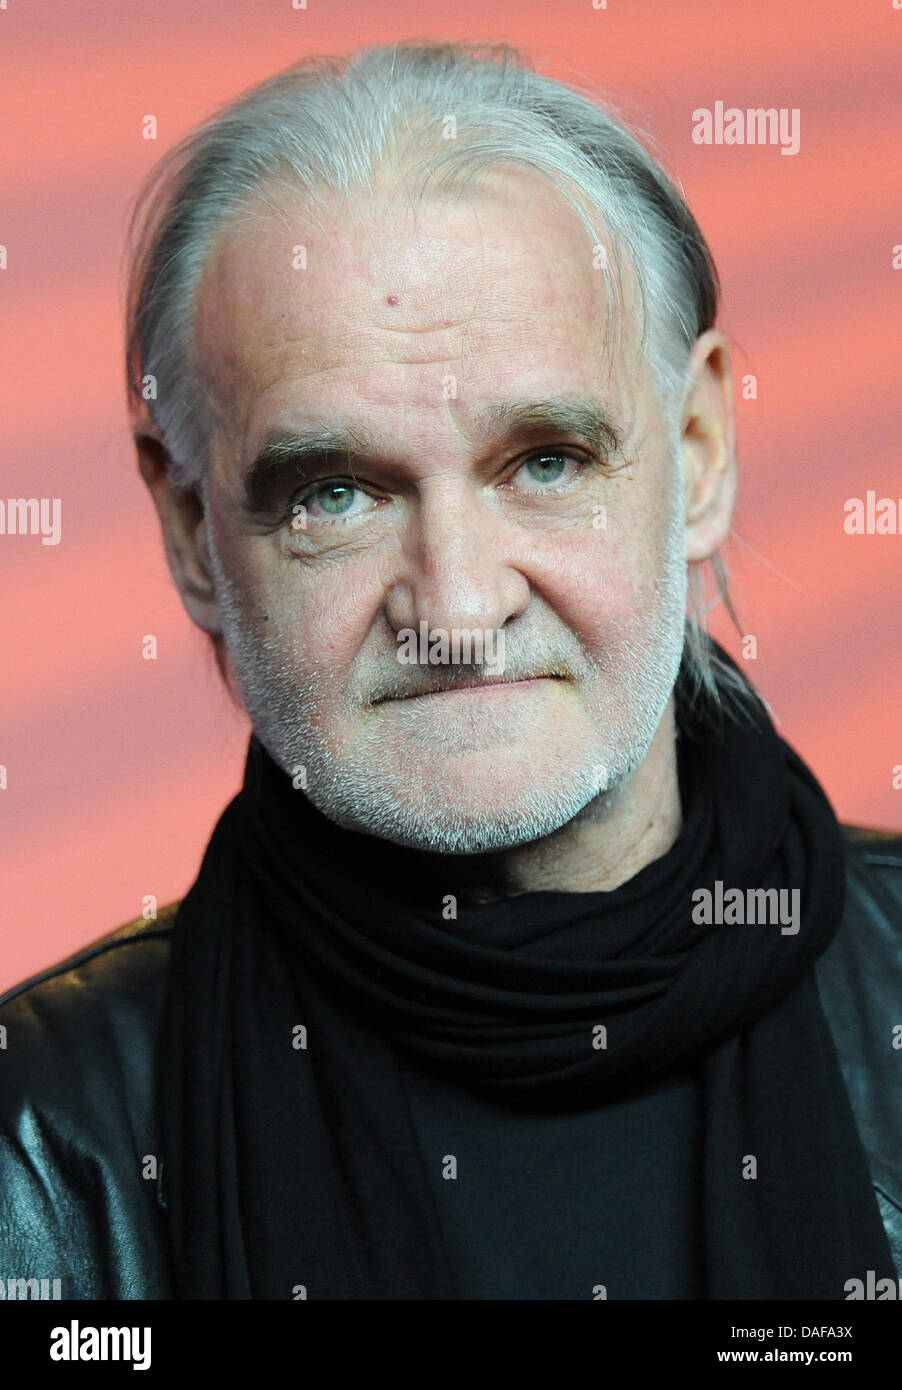 Hungarian director Bela Tarr attends the press conference of the film 'The Turin Horse' ('A torinoi lo') during the 61st Berlin International Film Festival in Berlin, Germany, 15 February 2011. The film is shown in the competition program section of the International Film Festival. The 61st Berlinale takes place from 10 to 20 February 2011. Photo: Britta Pedersen Stock Photo